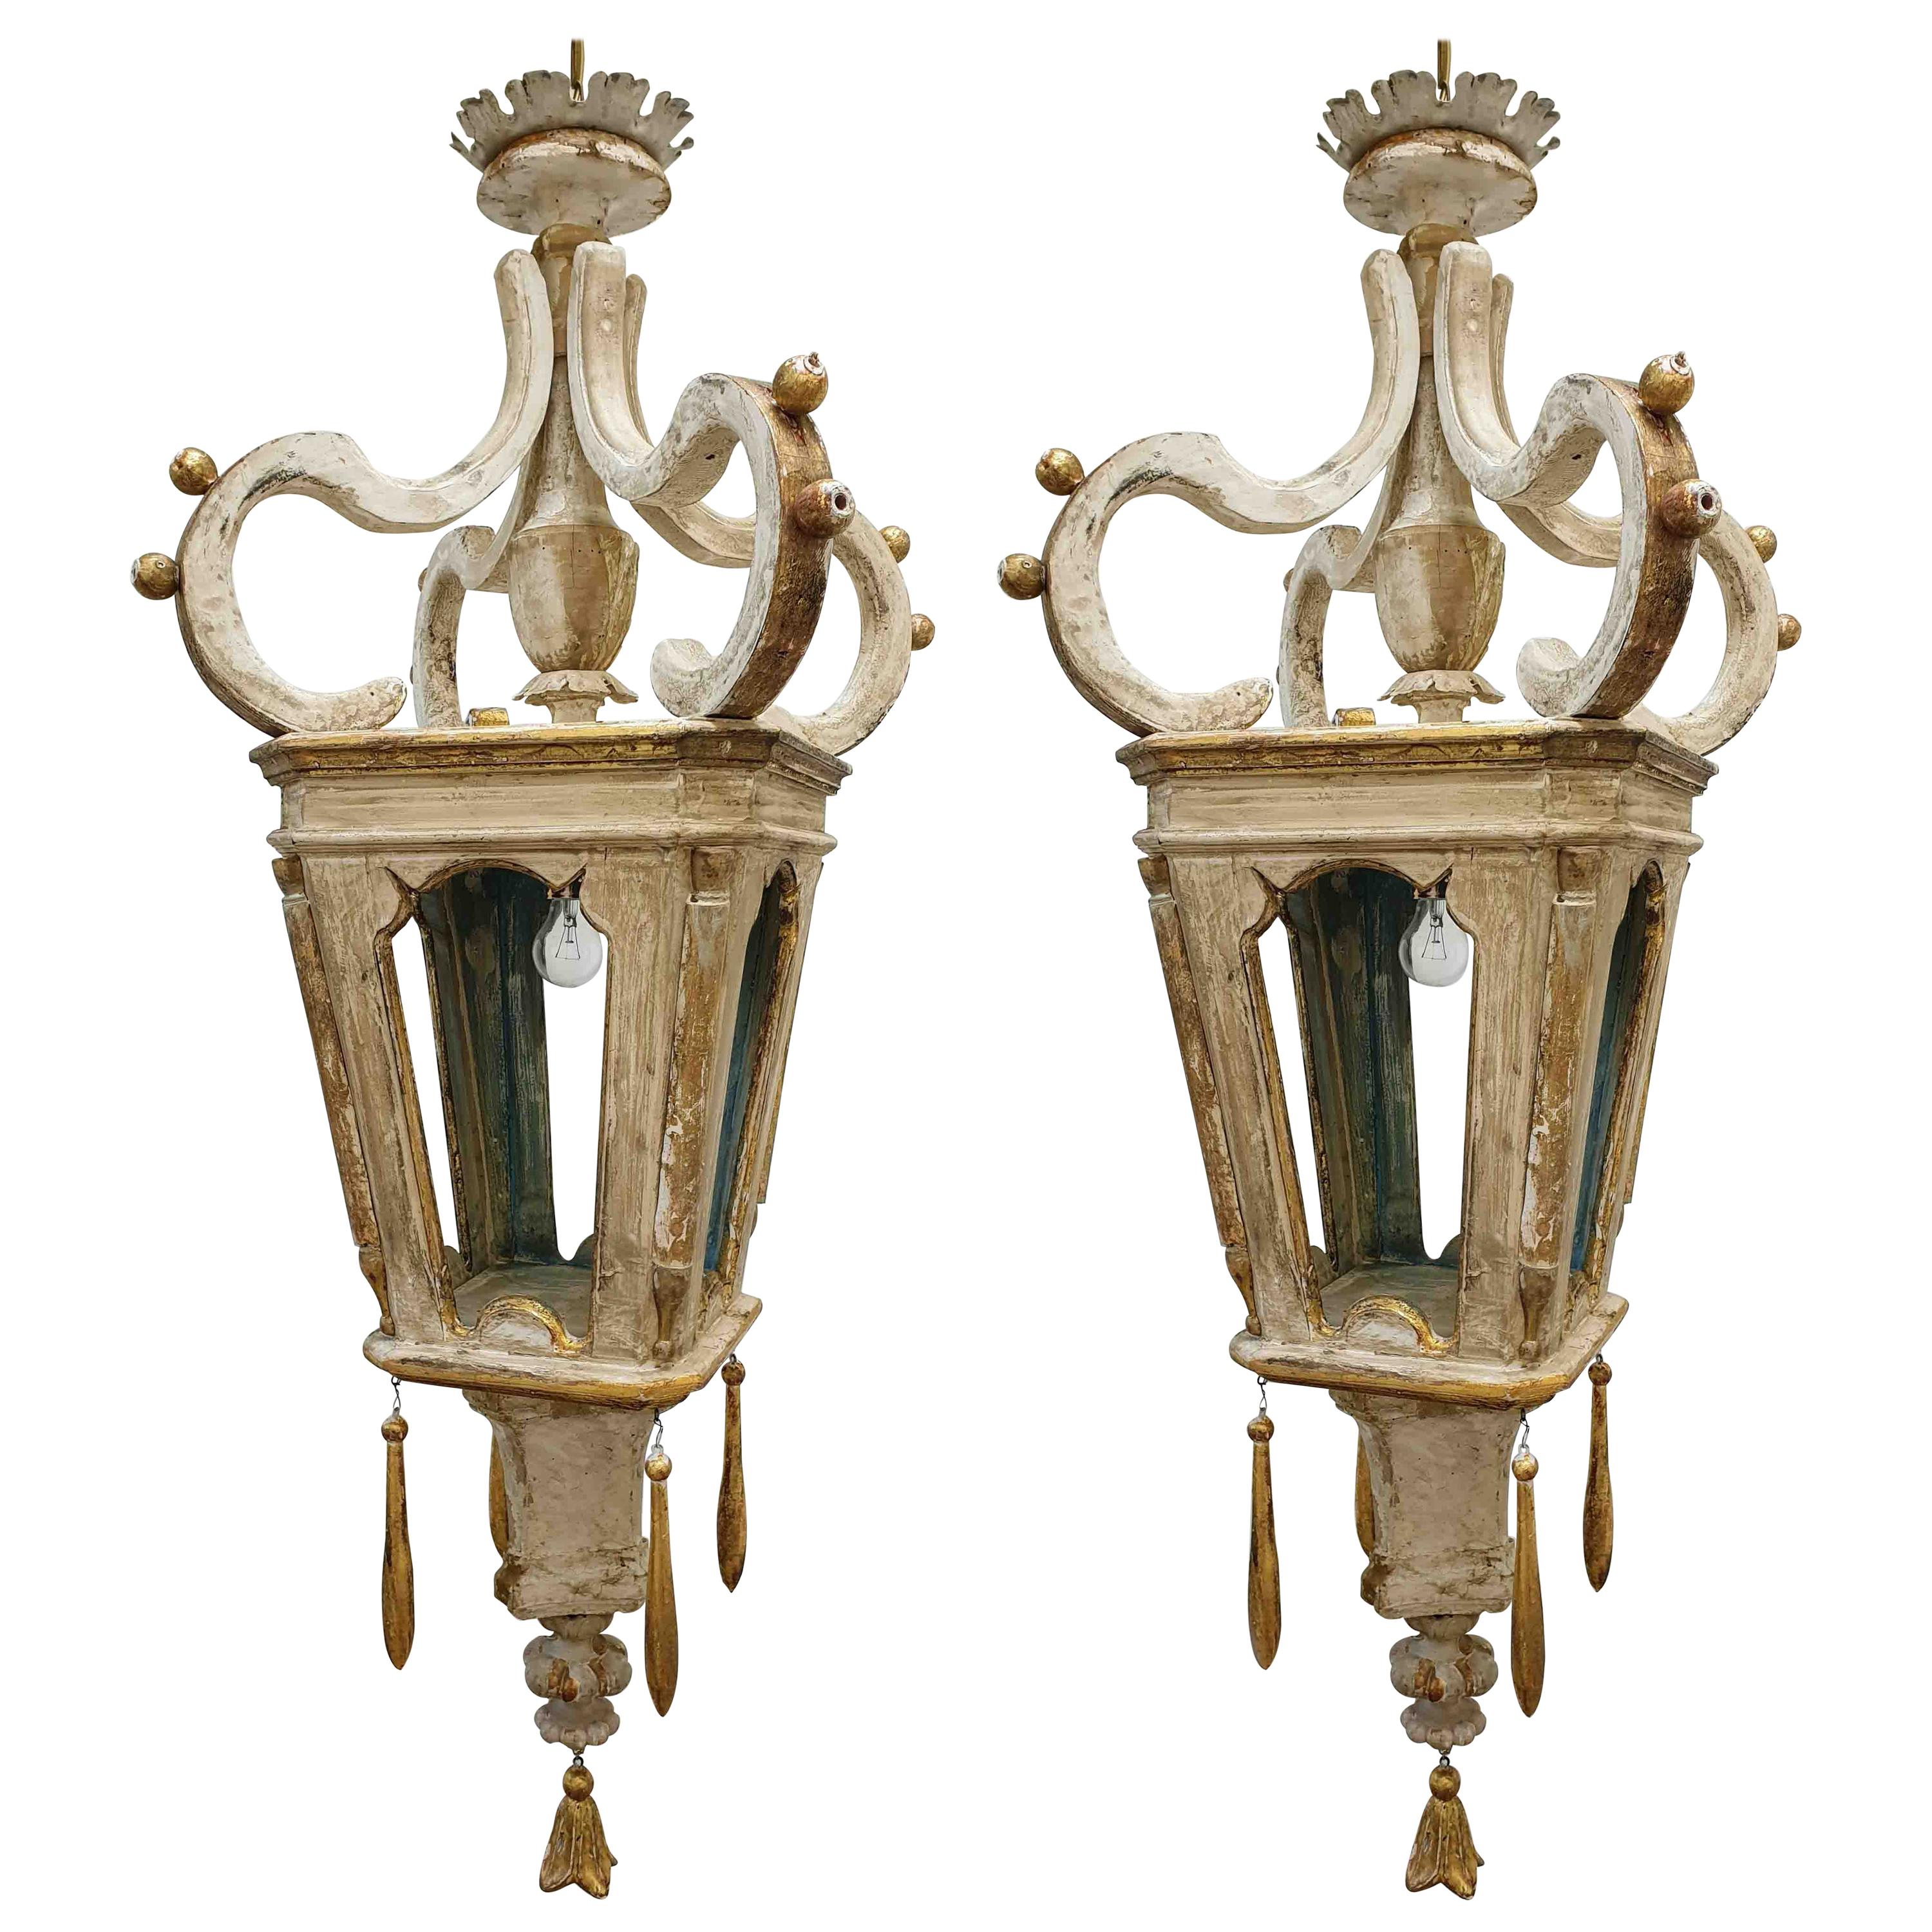 Pair of Wooden Lanterns Made from 18th Century Fragments